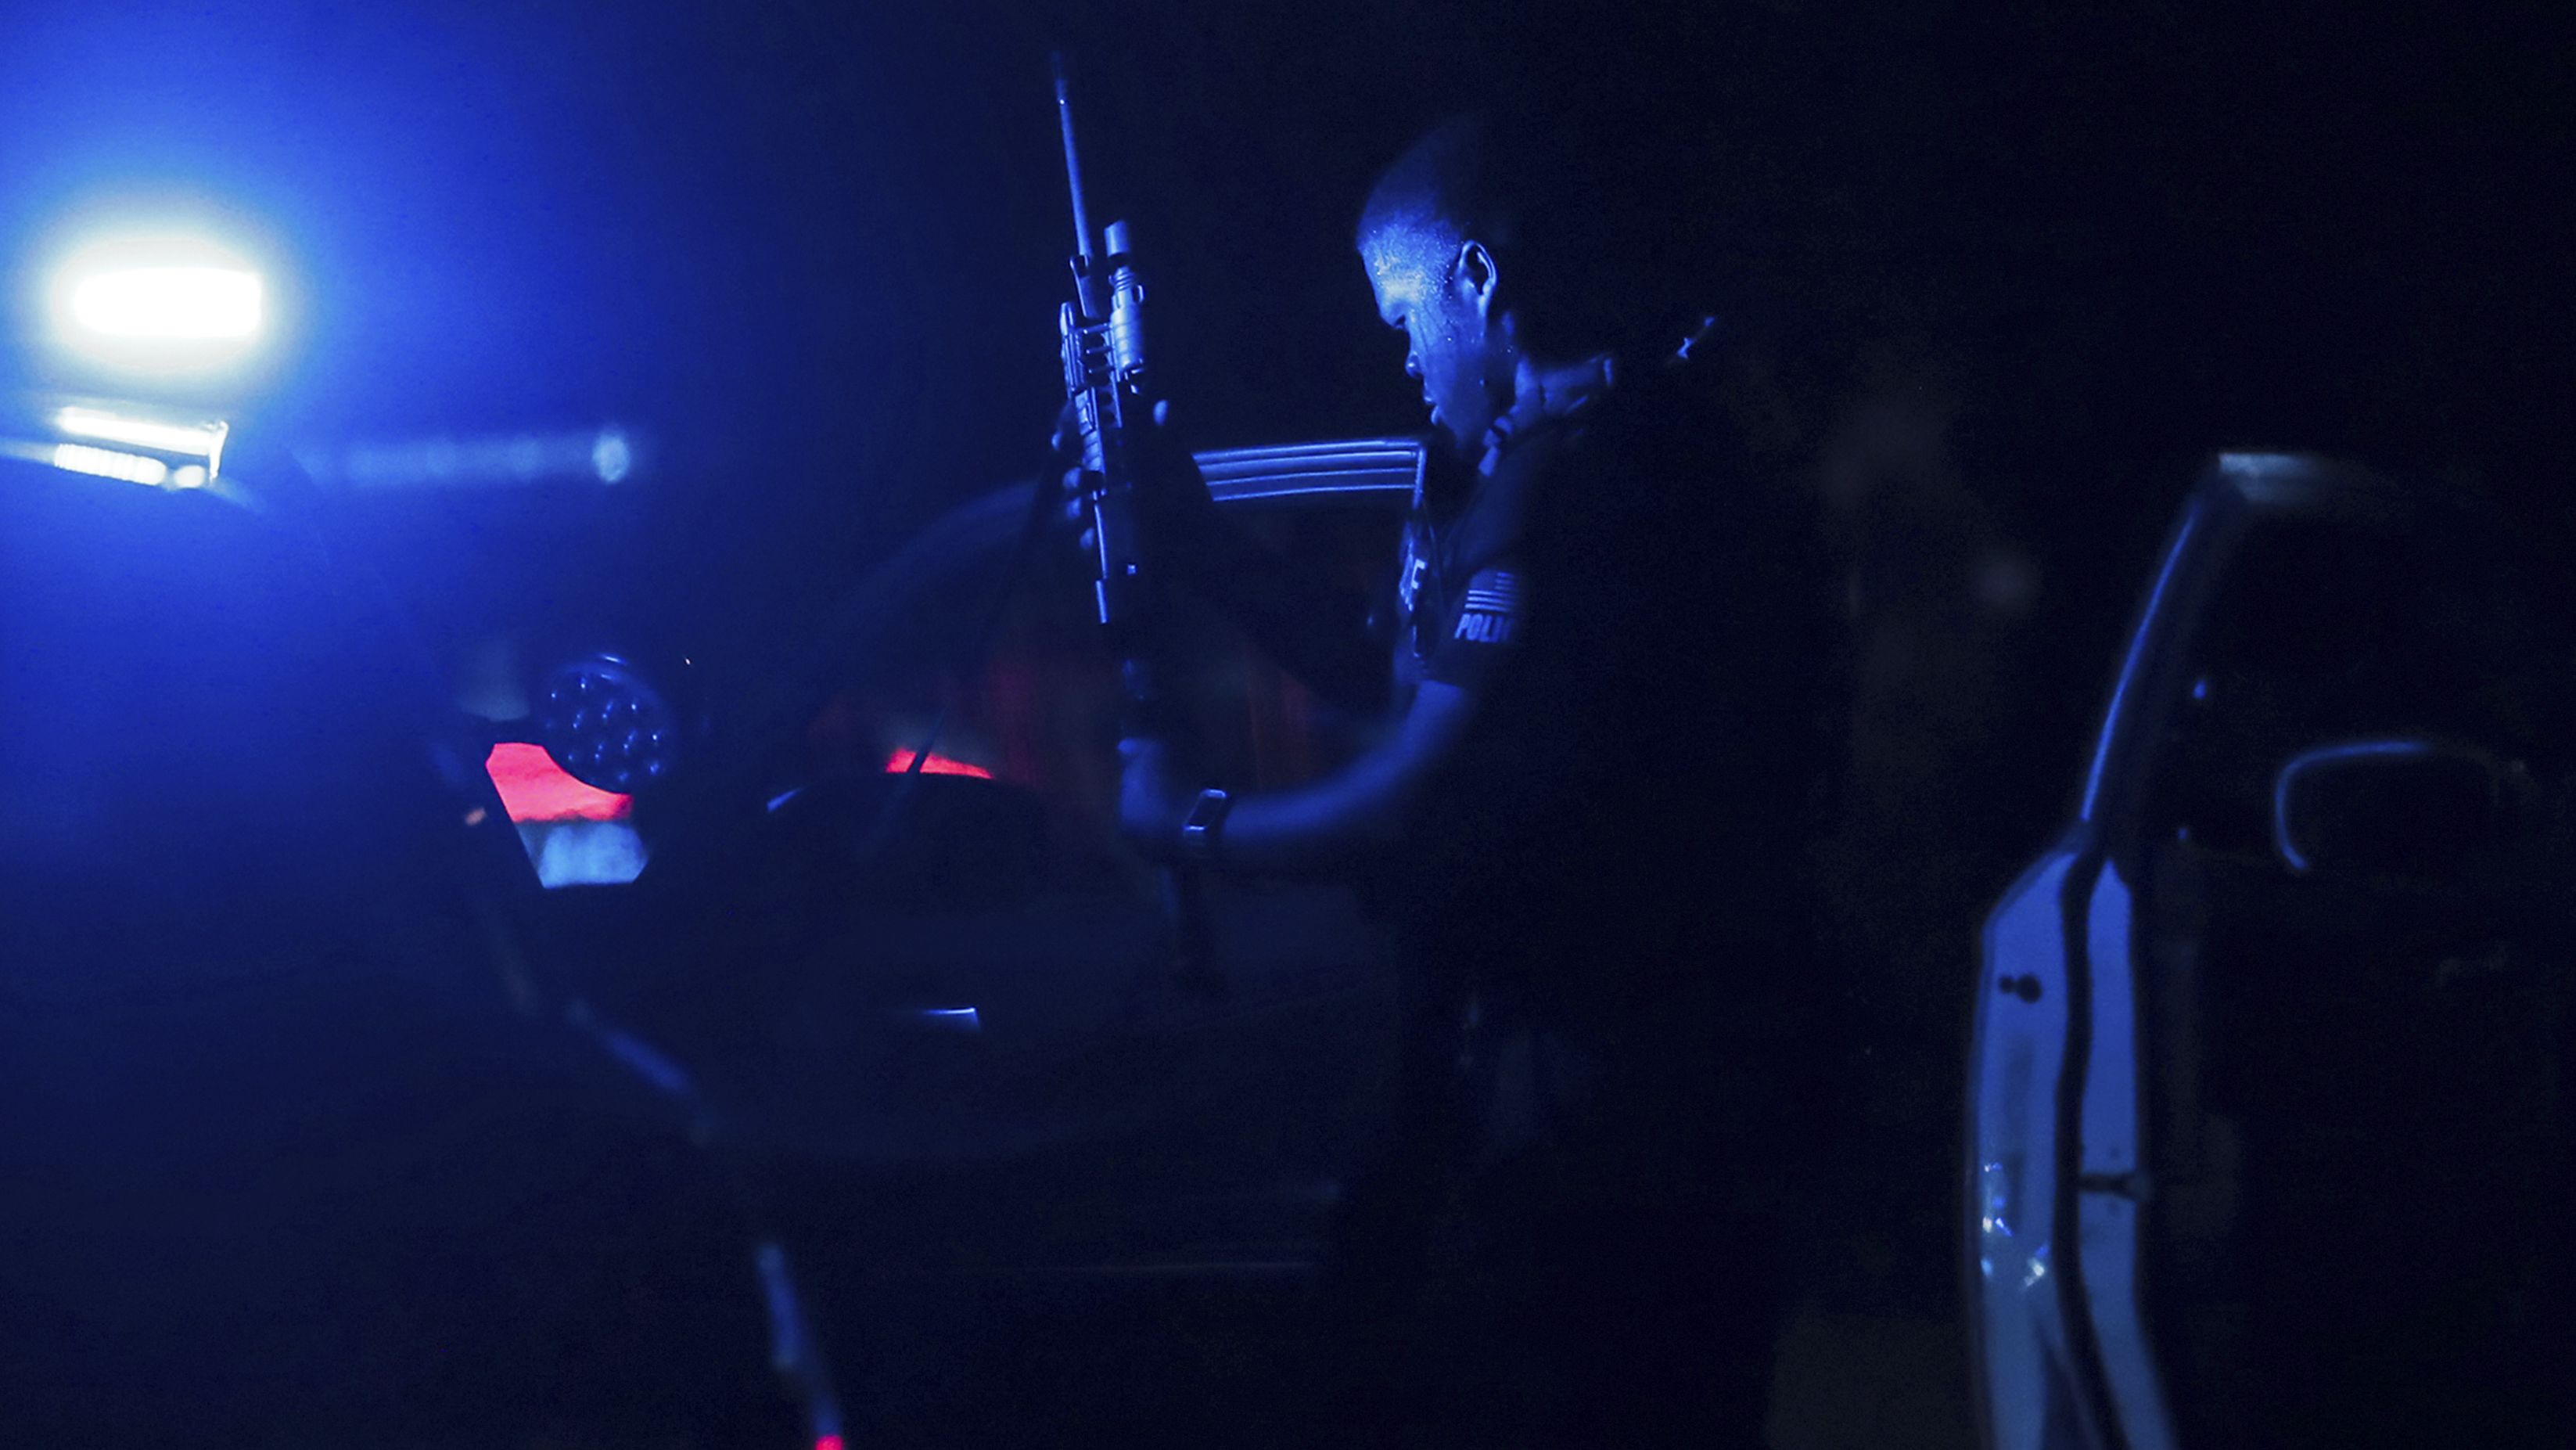 A police officer loads his gun at a crime scene in Memphis, Tennessee, on Wednesday, September 7. A 19-year-old man was arrested Wednesday after livestreaming part of a <a href="https://www.cnn.com/2022/09/07/us/memphis-shootings-suspect-detained/index.html" target="_blank">shooting rampage</a> that left four people dead and three others injured, police said.